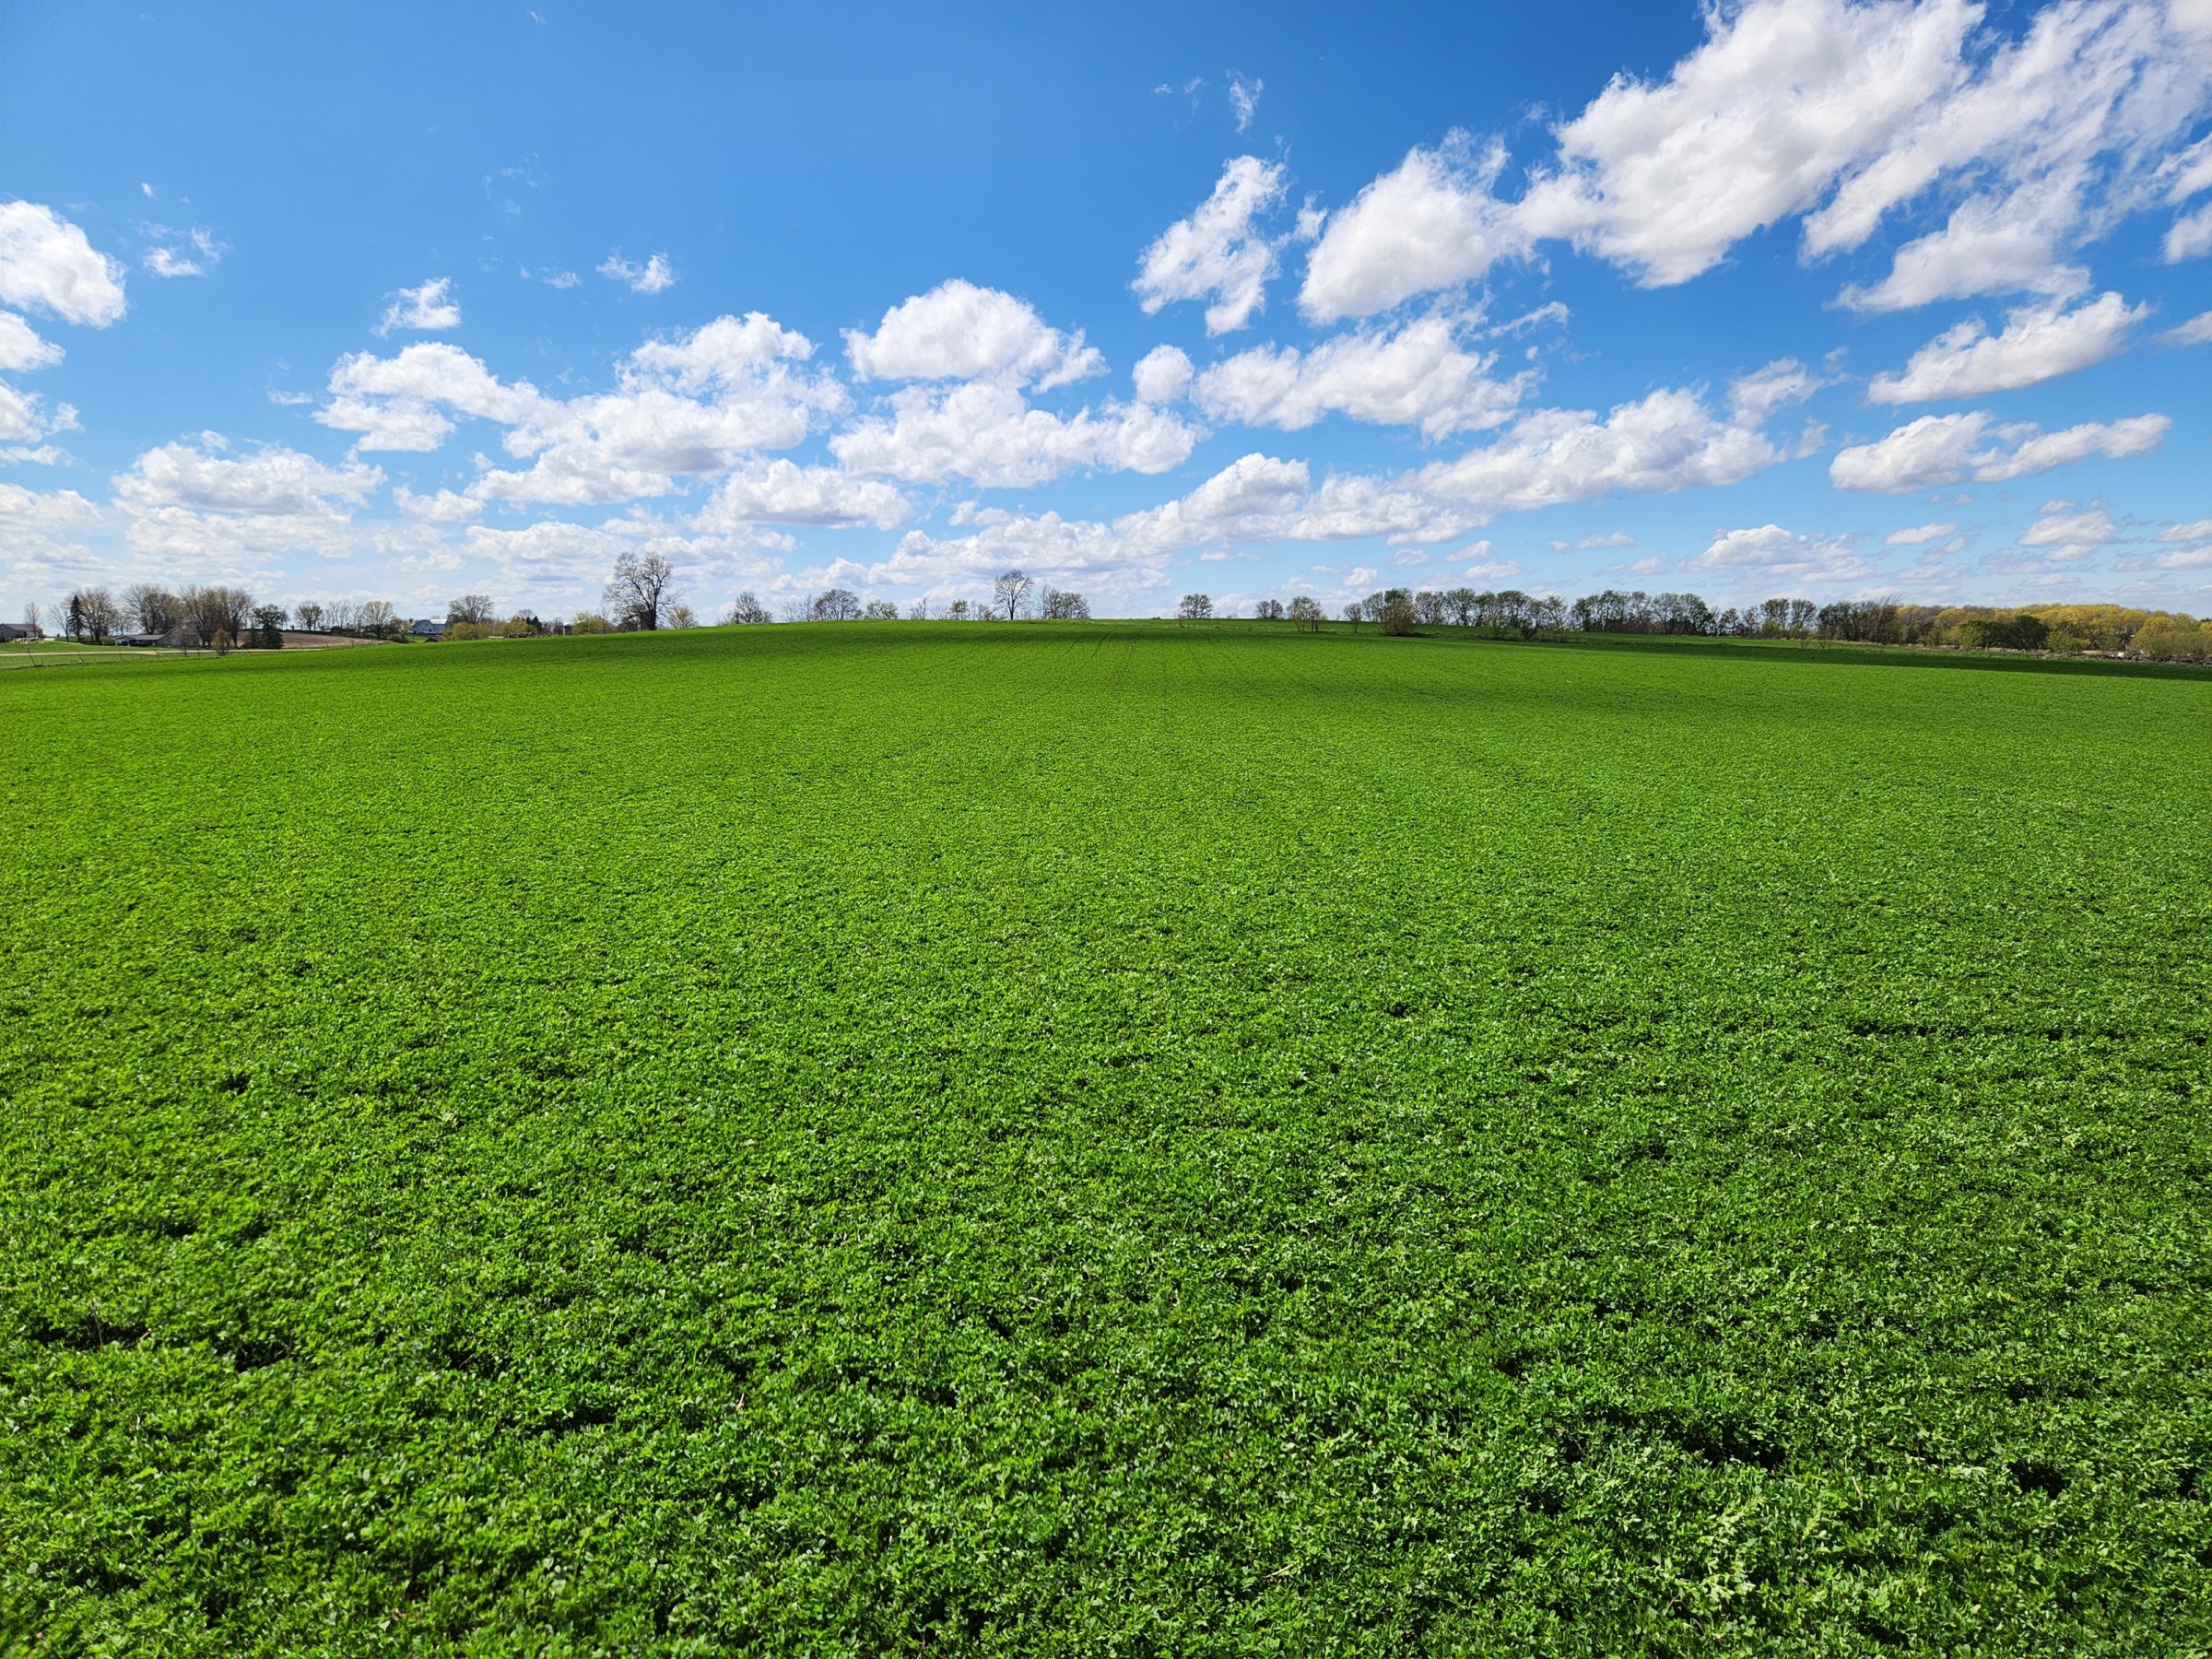 Photo of an alfalfa field in the spring on a sunny day with blue sky and clouds